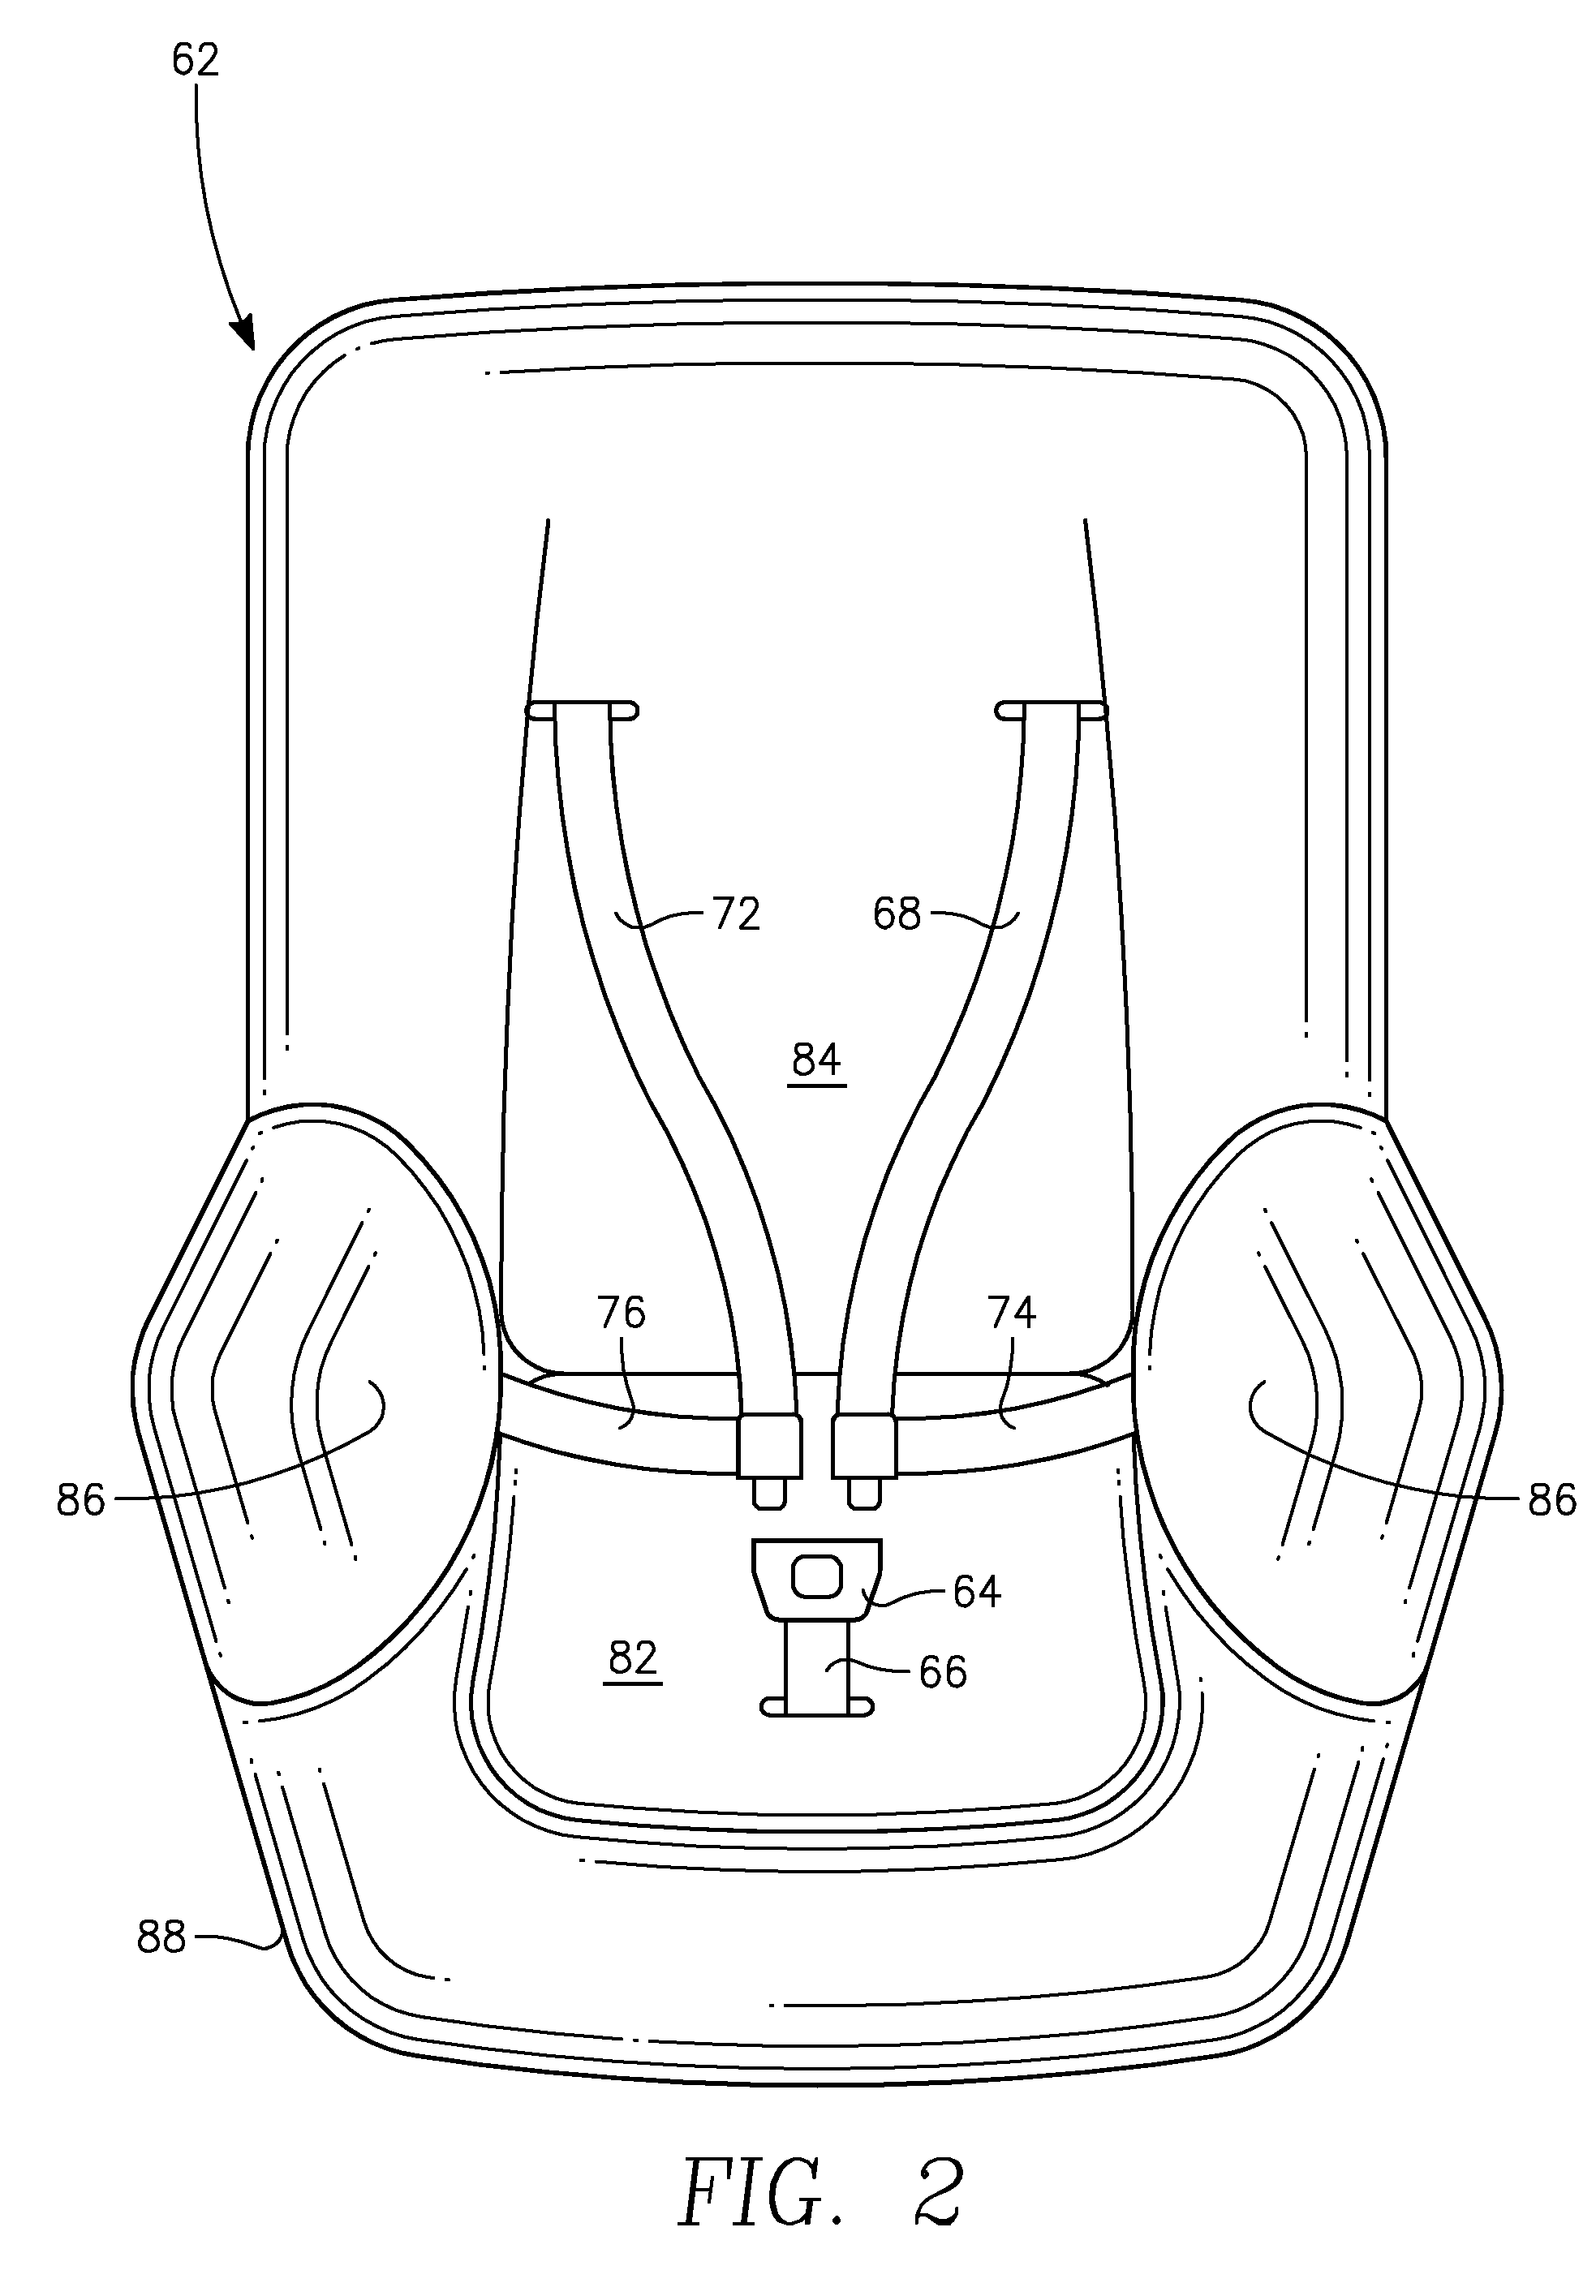 Cover for child car seat